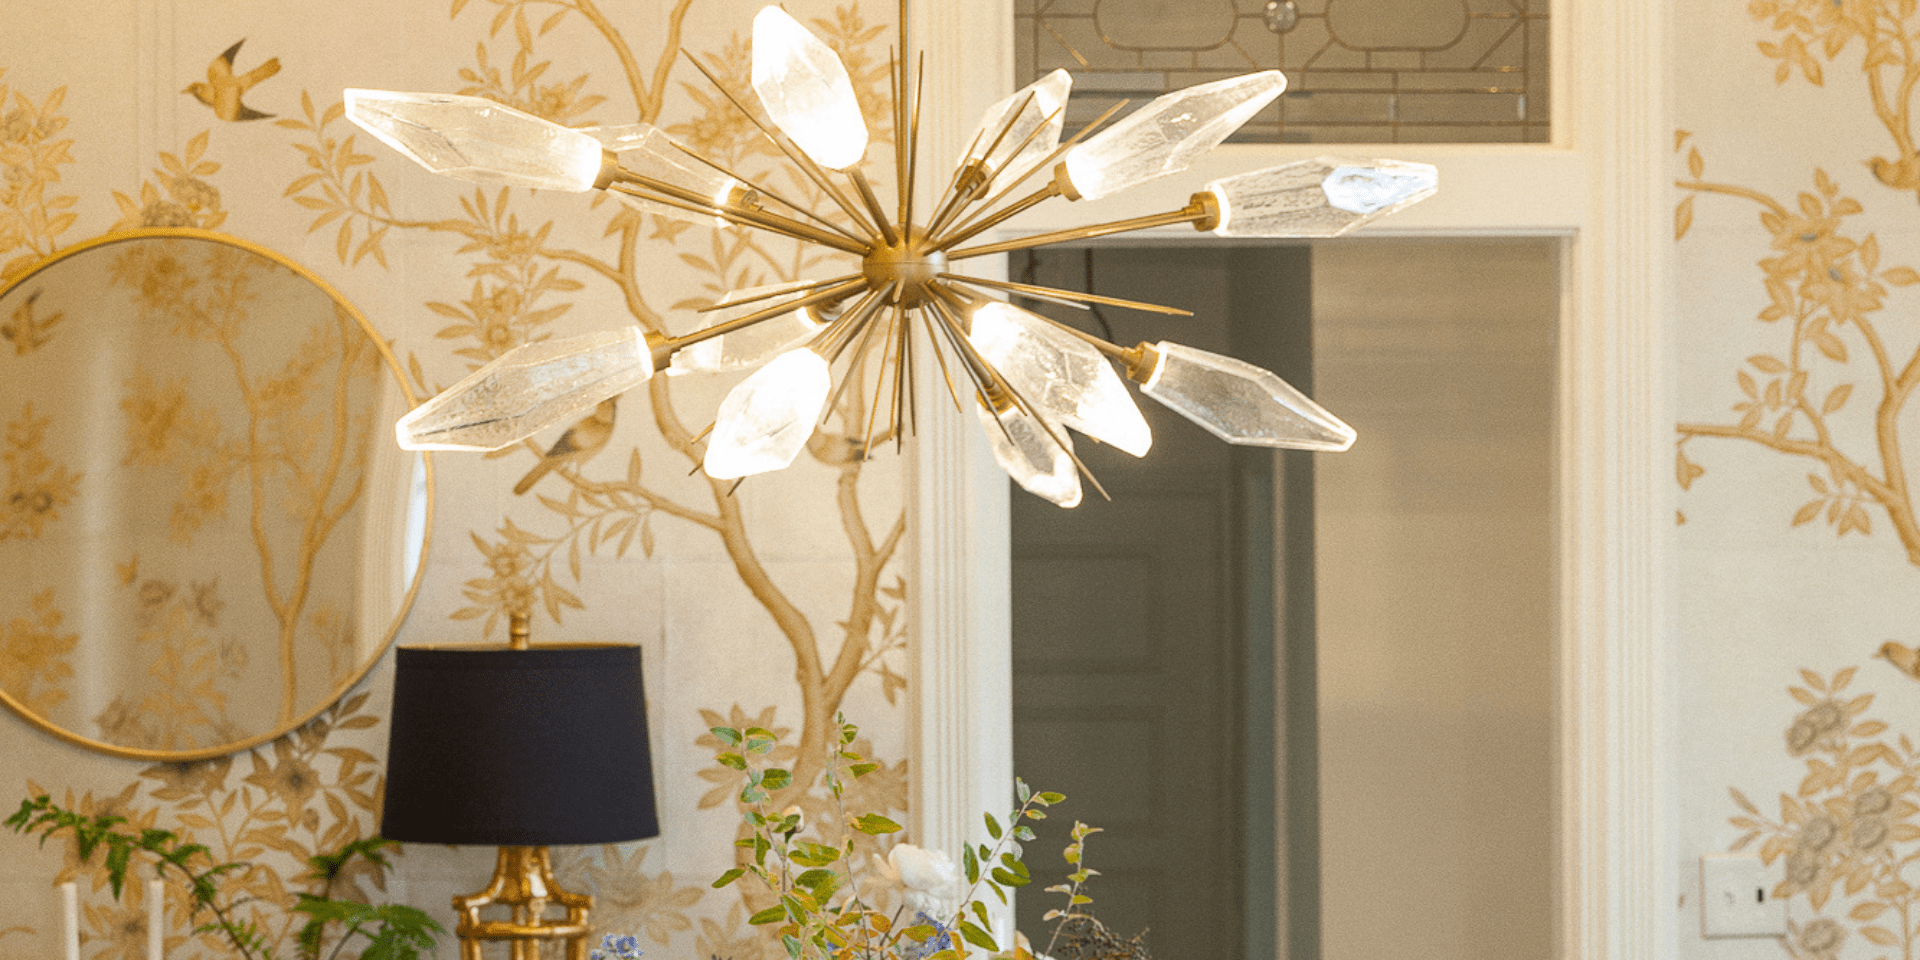 Hammerton Studio's Rock Crystal starburst chandelier features a dozen clear rock crystal-shaped glass shades extending on solid brass rods from a brass center to form a beautiful oval centerpiece